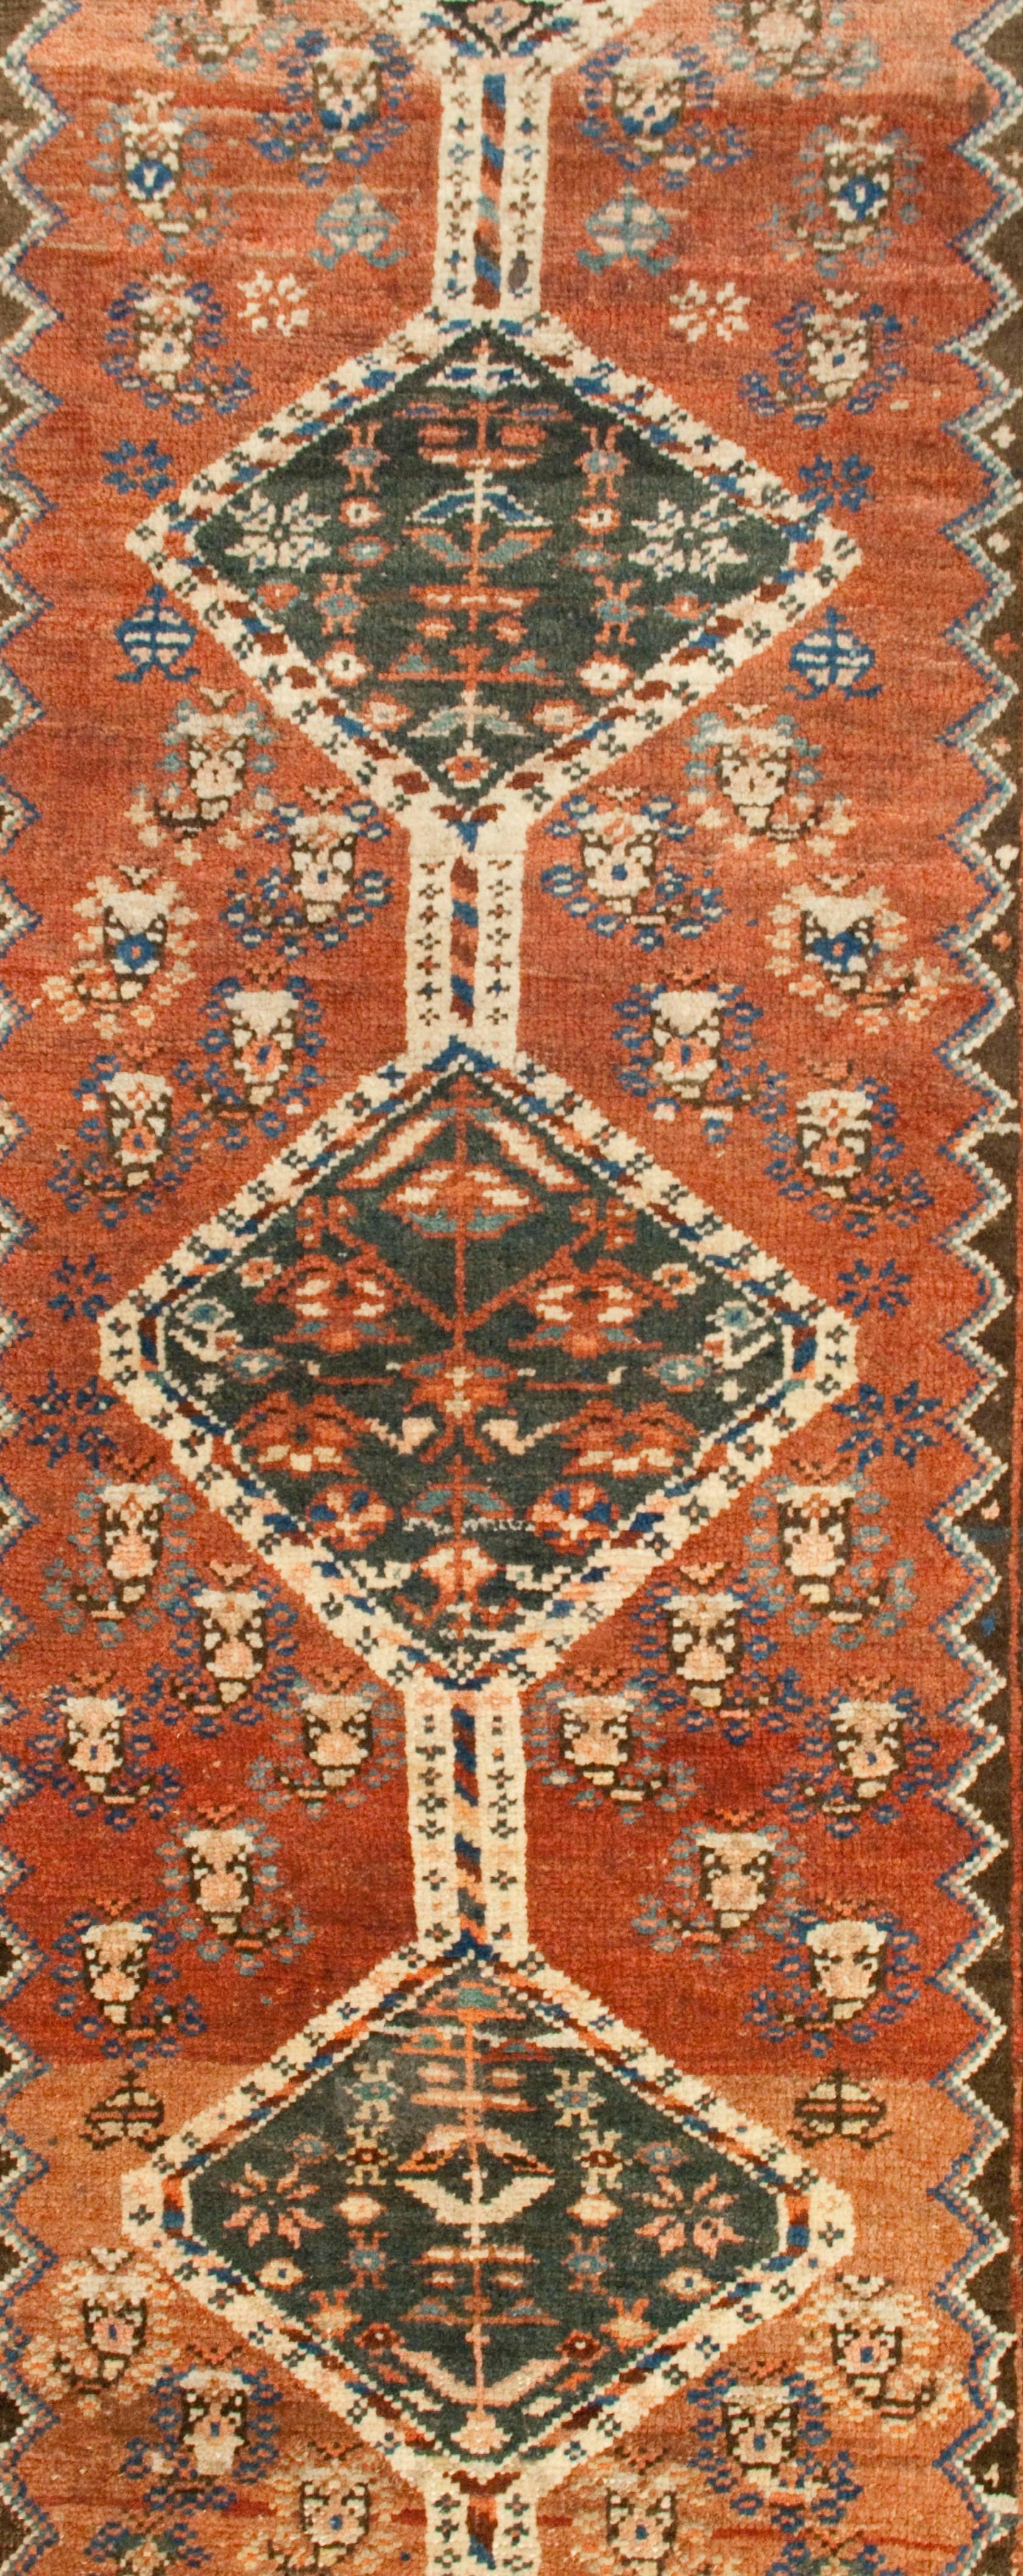 An early 20th century Persian Bidjar runner with ten diamond medallions on a variegated crimson field surrounded by multiple contrasting geometric and floral borders.